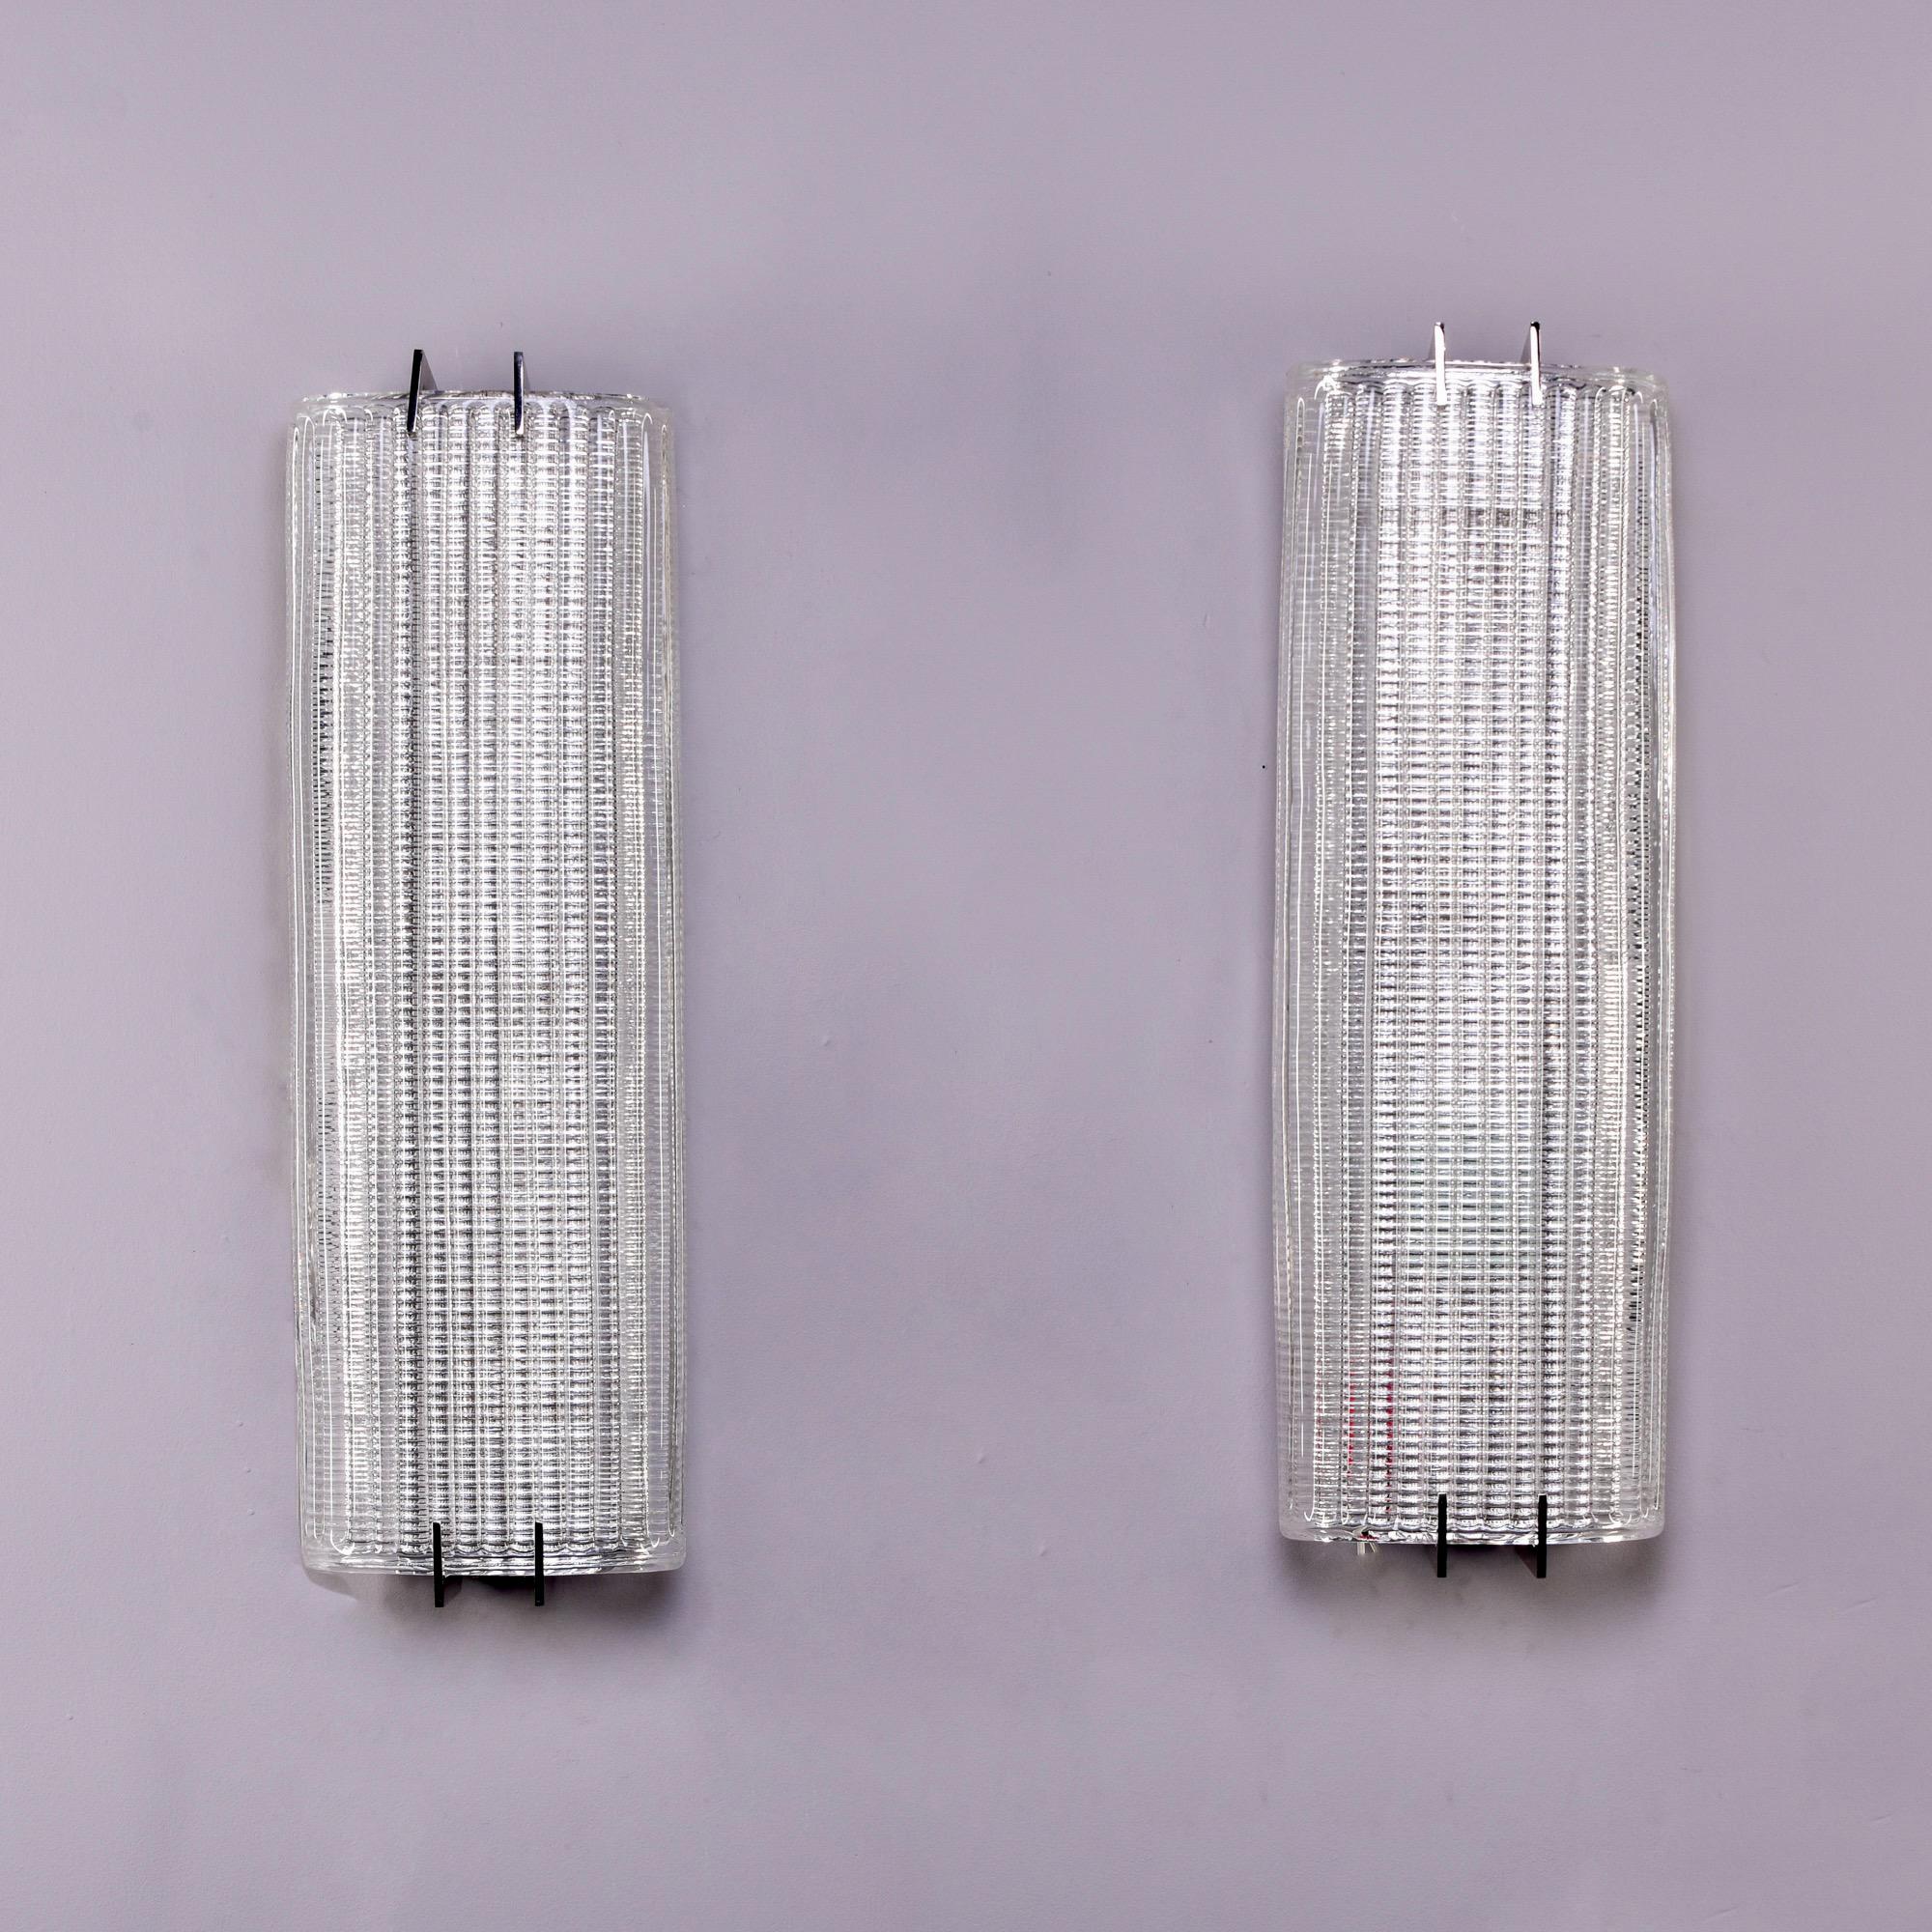 New sconces of heavy, clear textured and ribbed Murano glass with polished chrome hardware are over 25” tall. Can be mounted vertically or horizontally. Each sconce has 4 sockets. Sold and priced as a pair. This style works well with mid century and